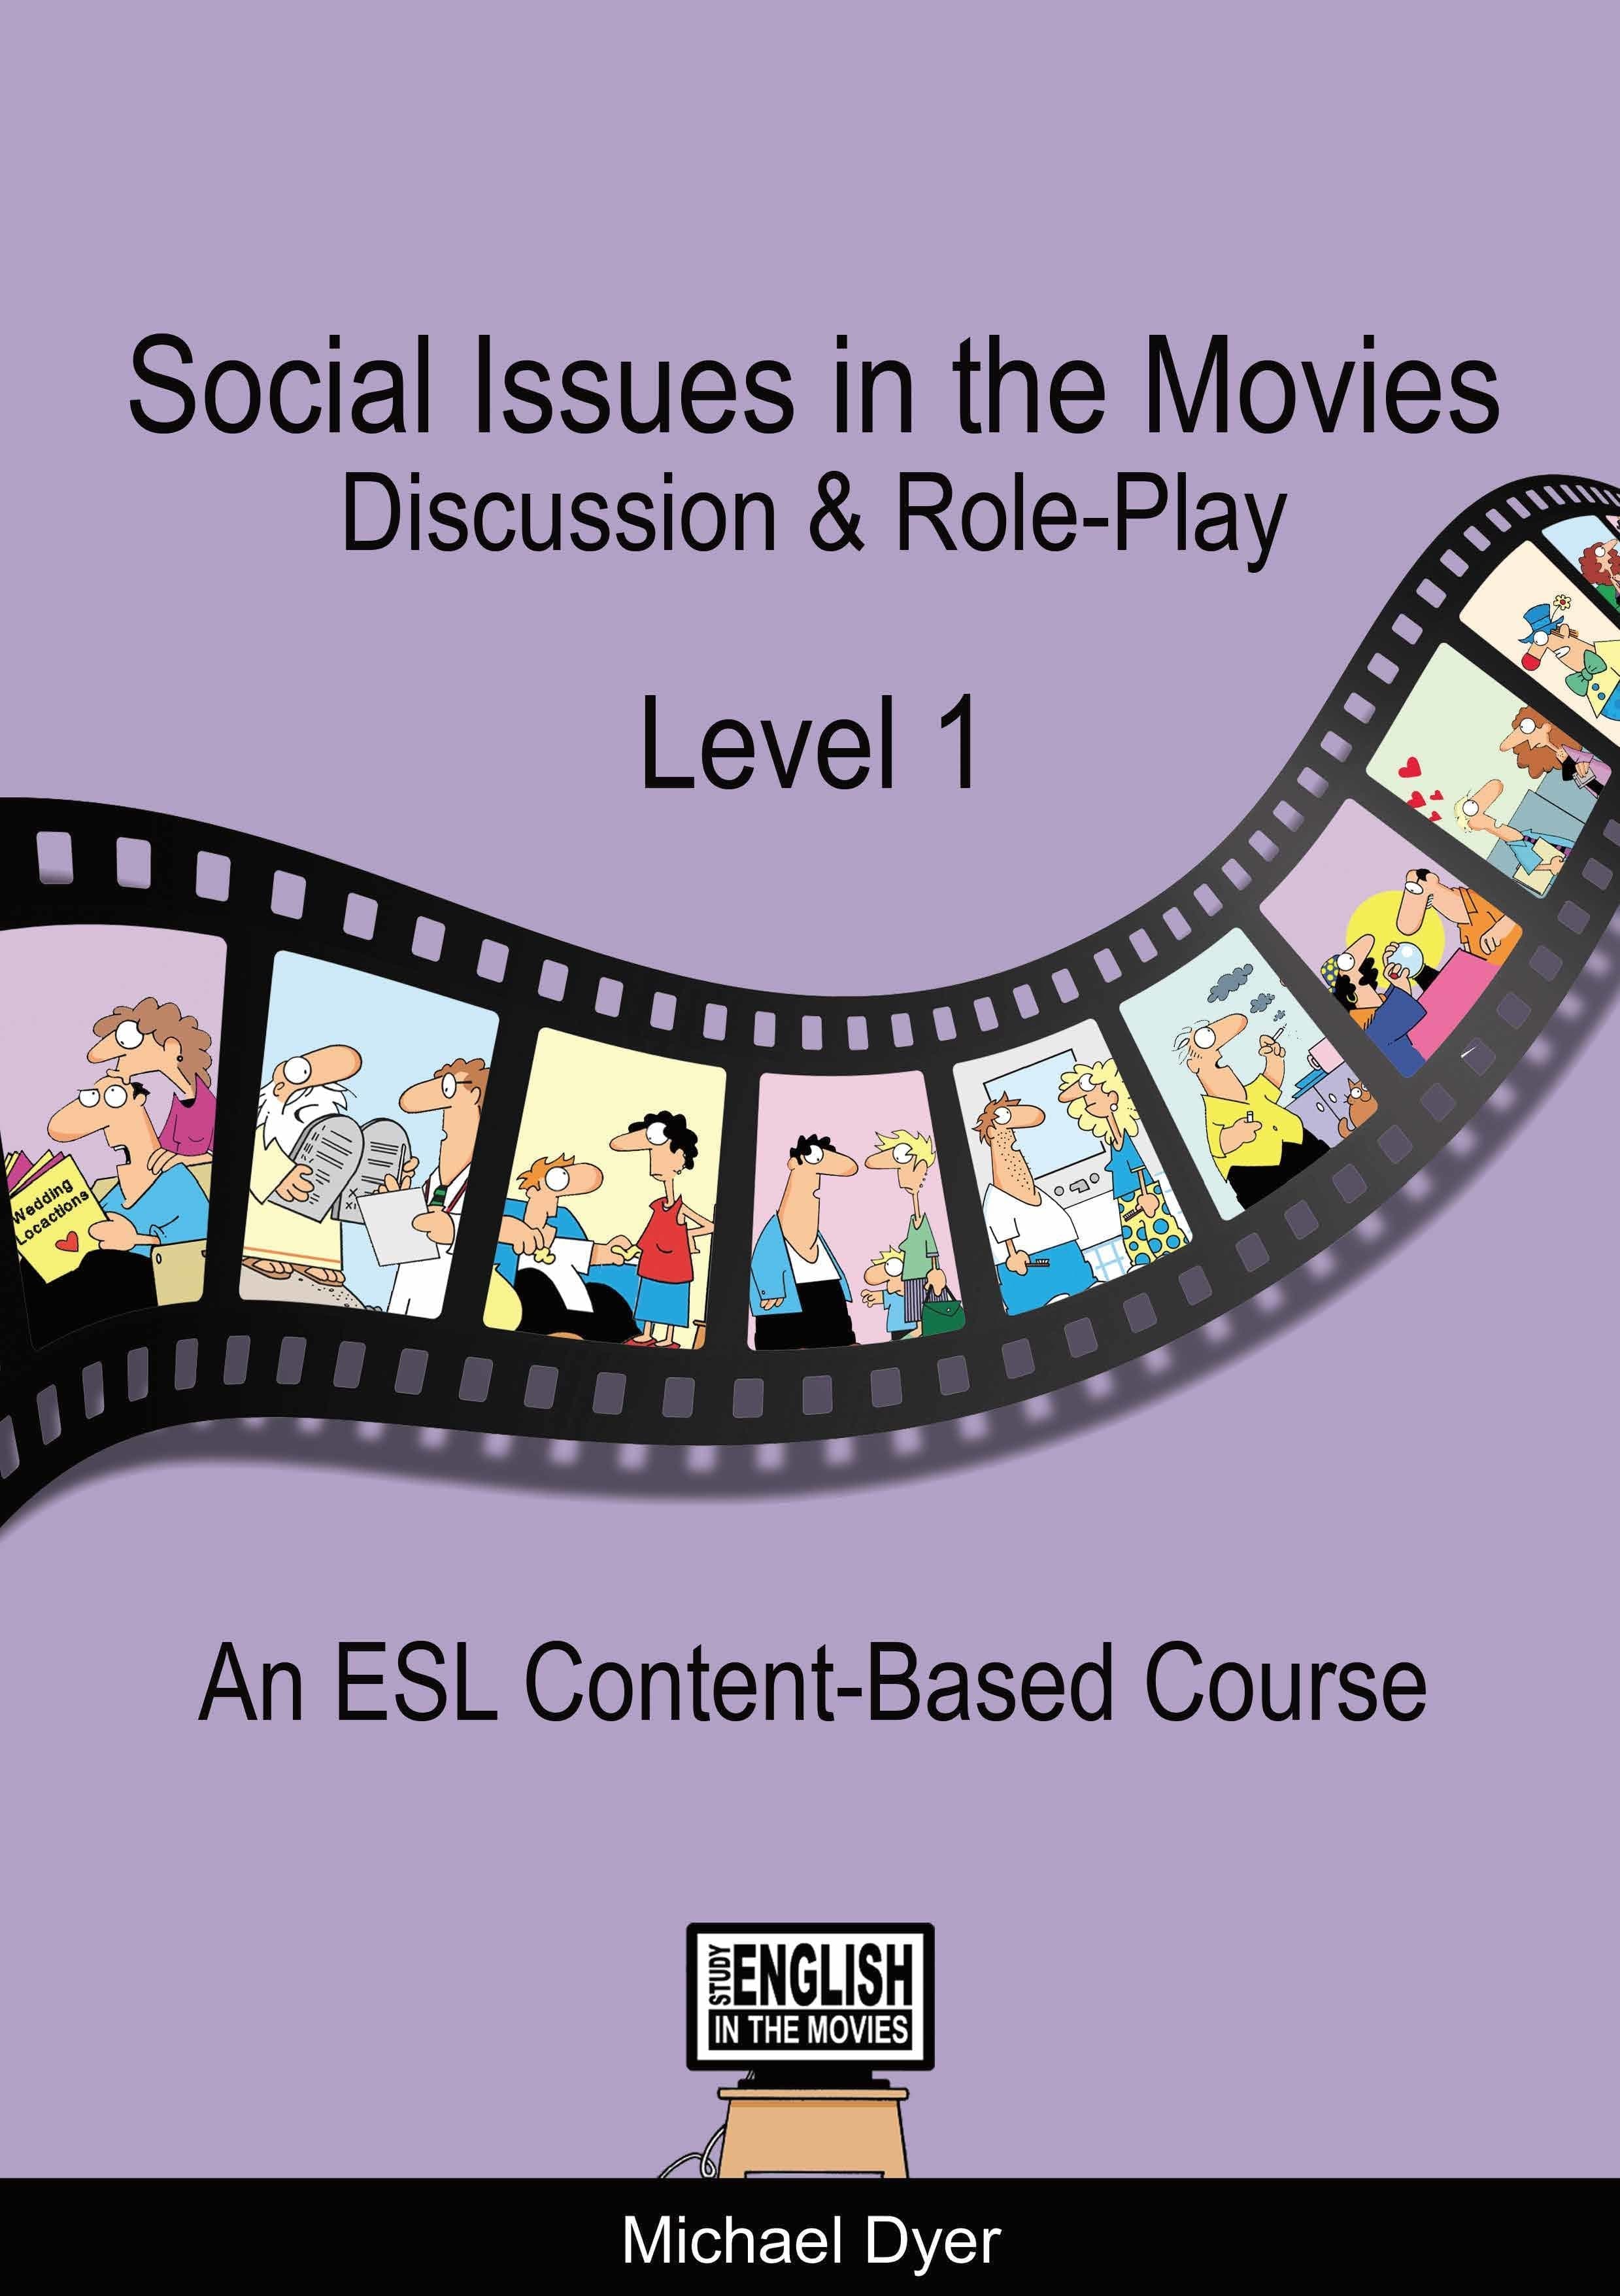 『Social Issues in the Movies Level1』Michael Dyer　著